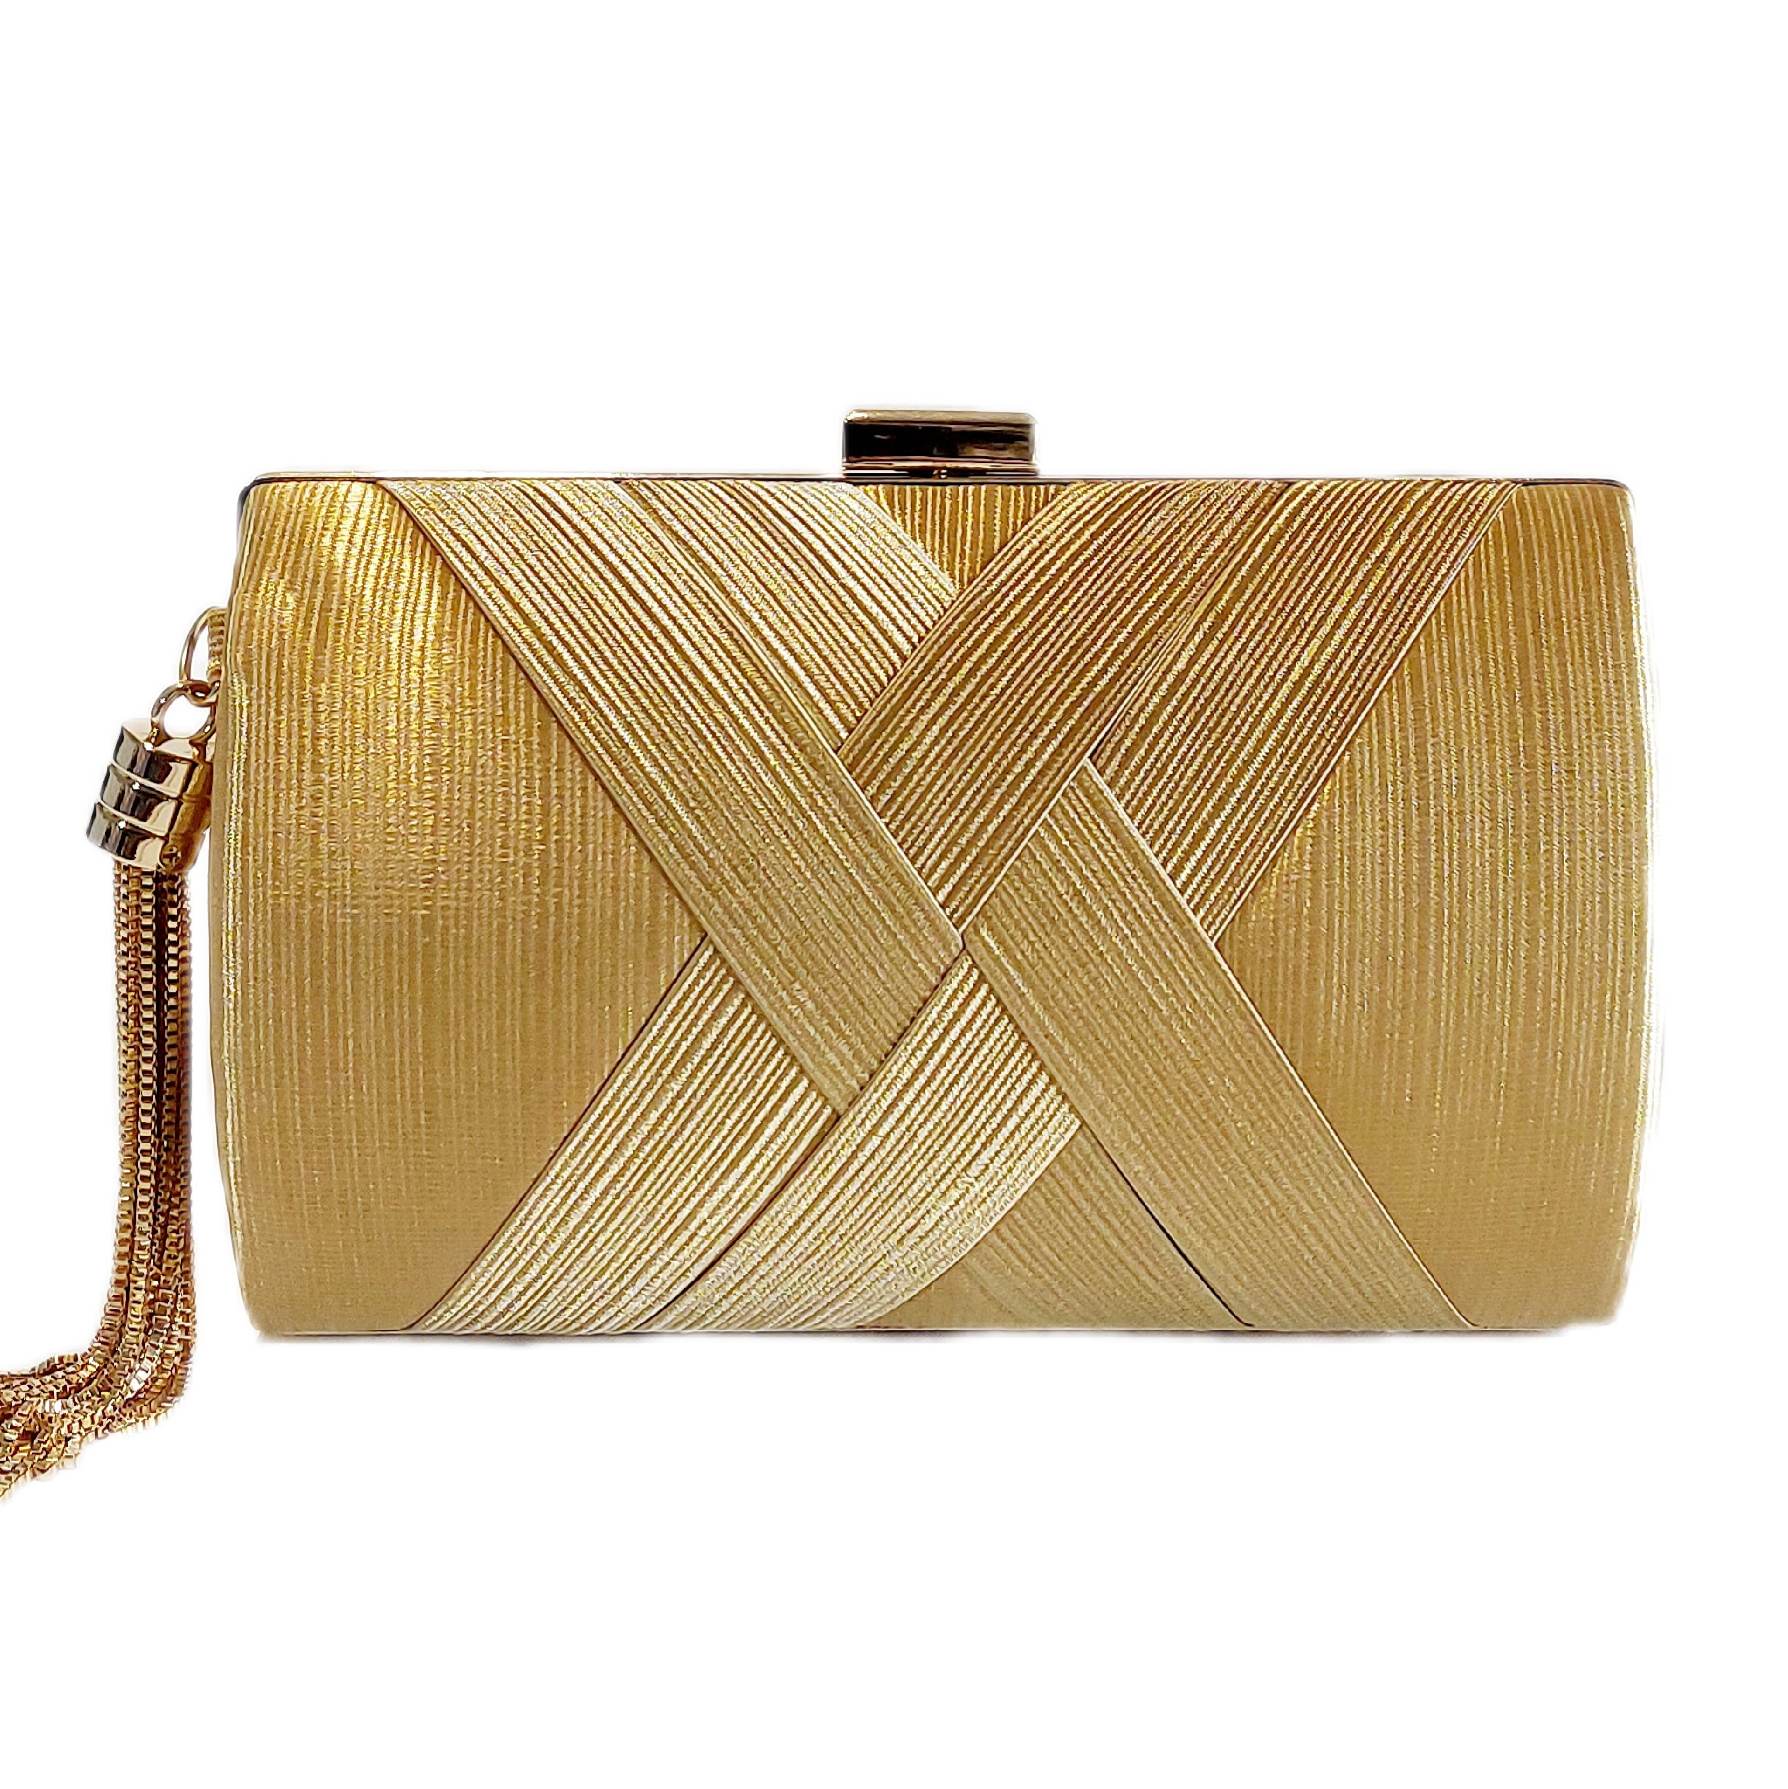 a stunning gold satin clutch for a glamorous evening